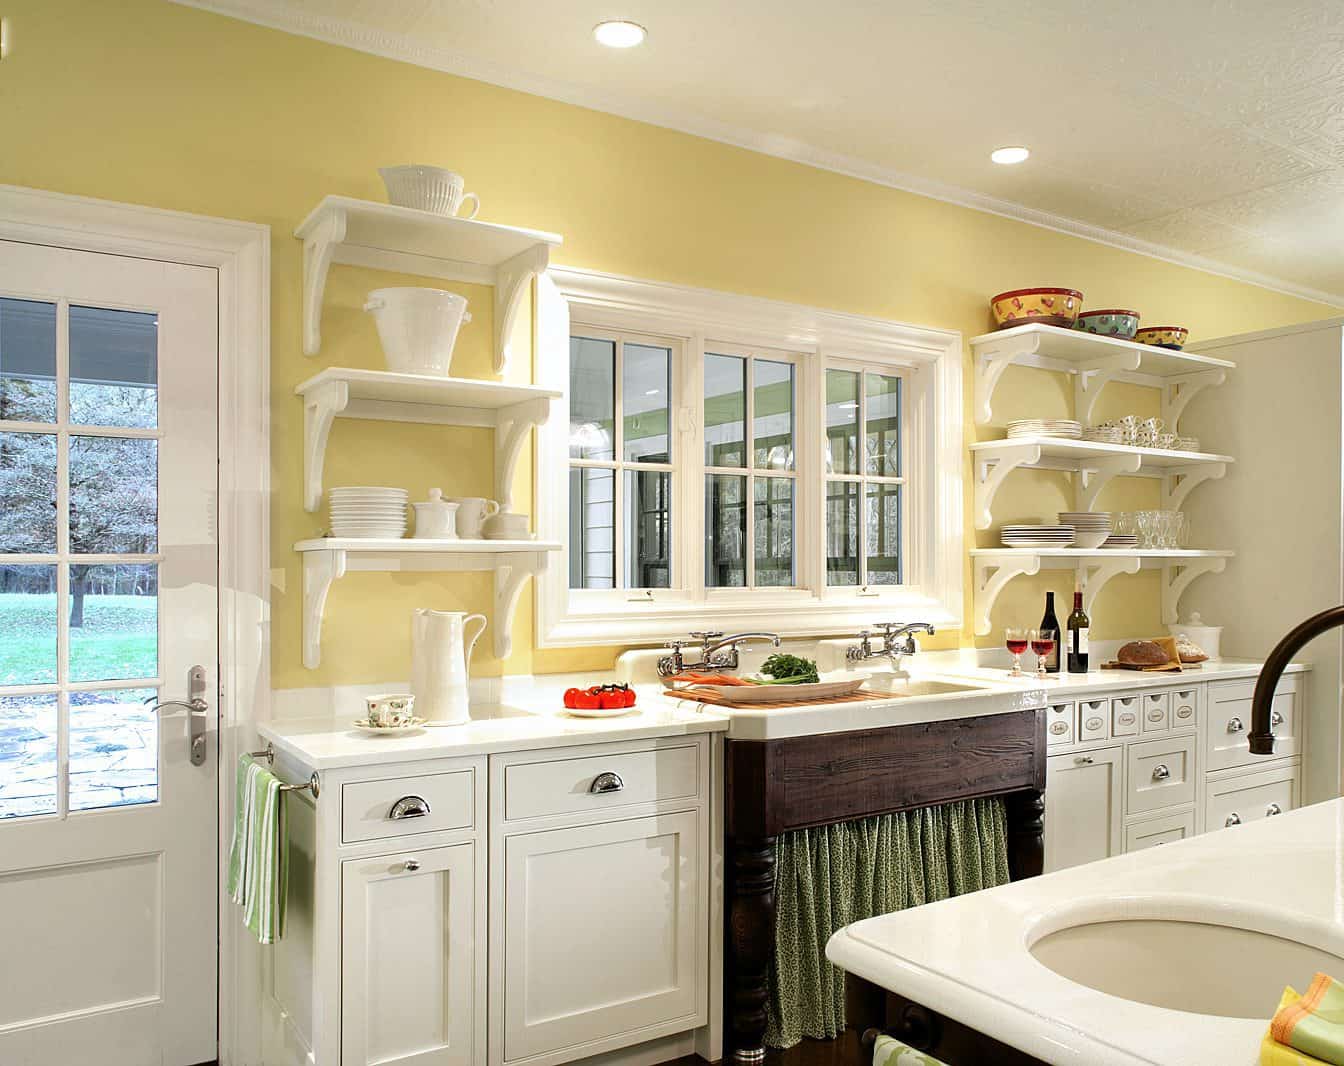 Classic White Kitchen with Reclaimed Wood Sink Base with Fabric Curtain